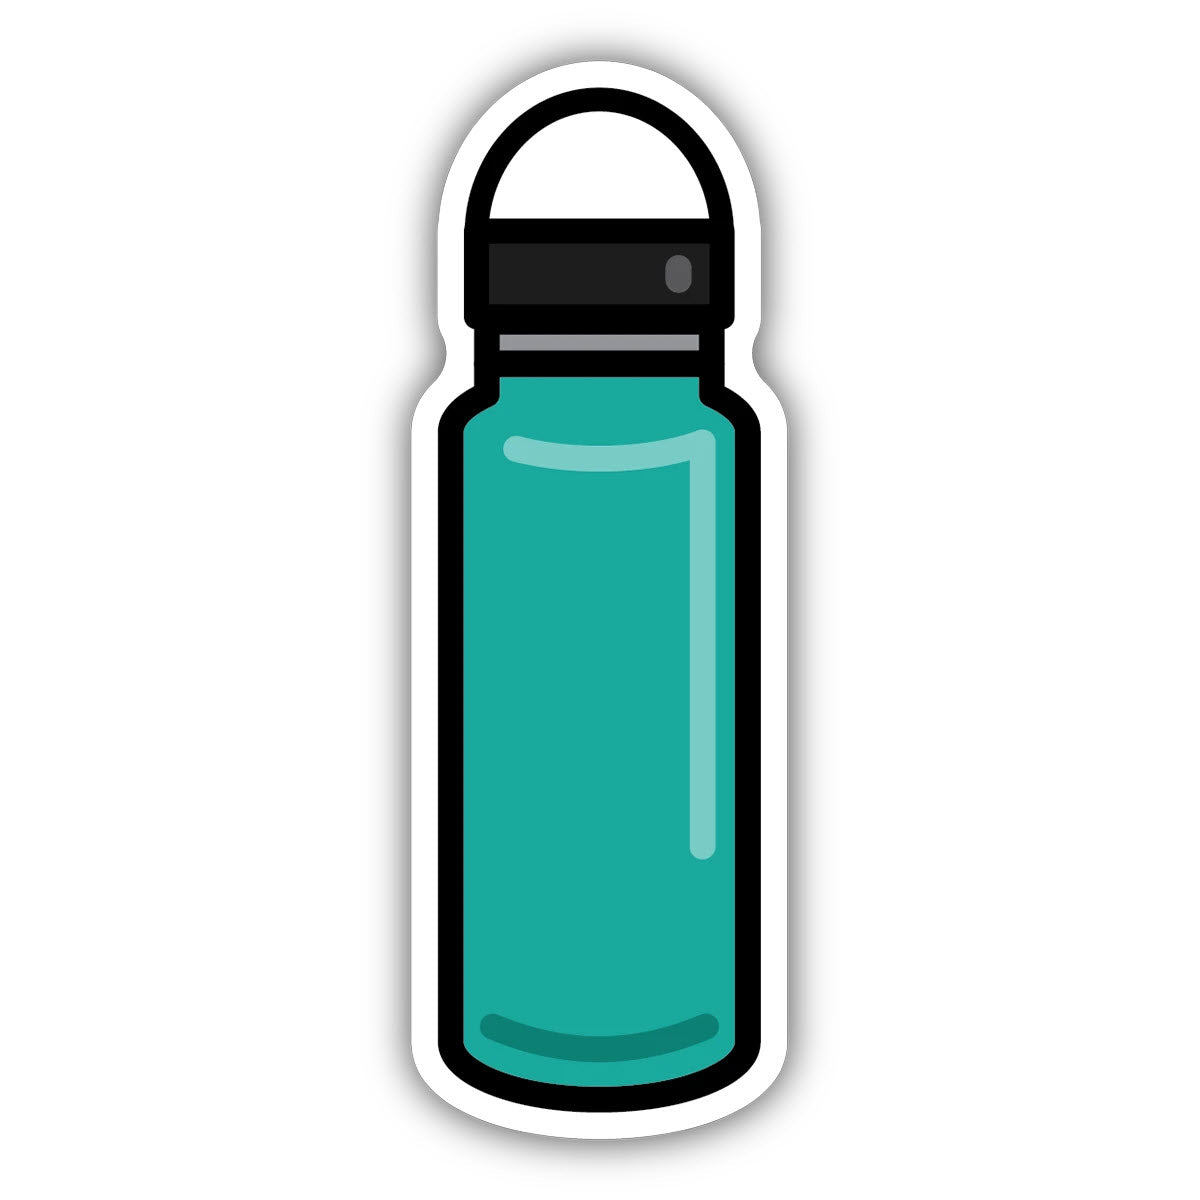 Stickers Northwest sticker of a weatherproof teal water bottle with a black cap.